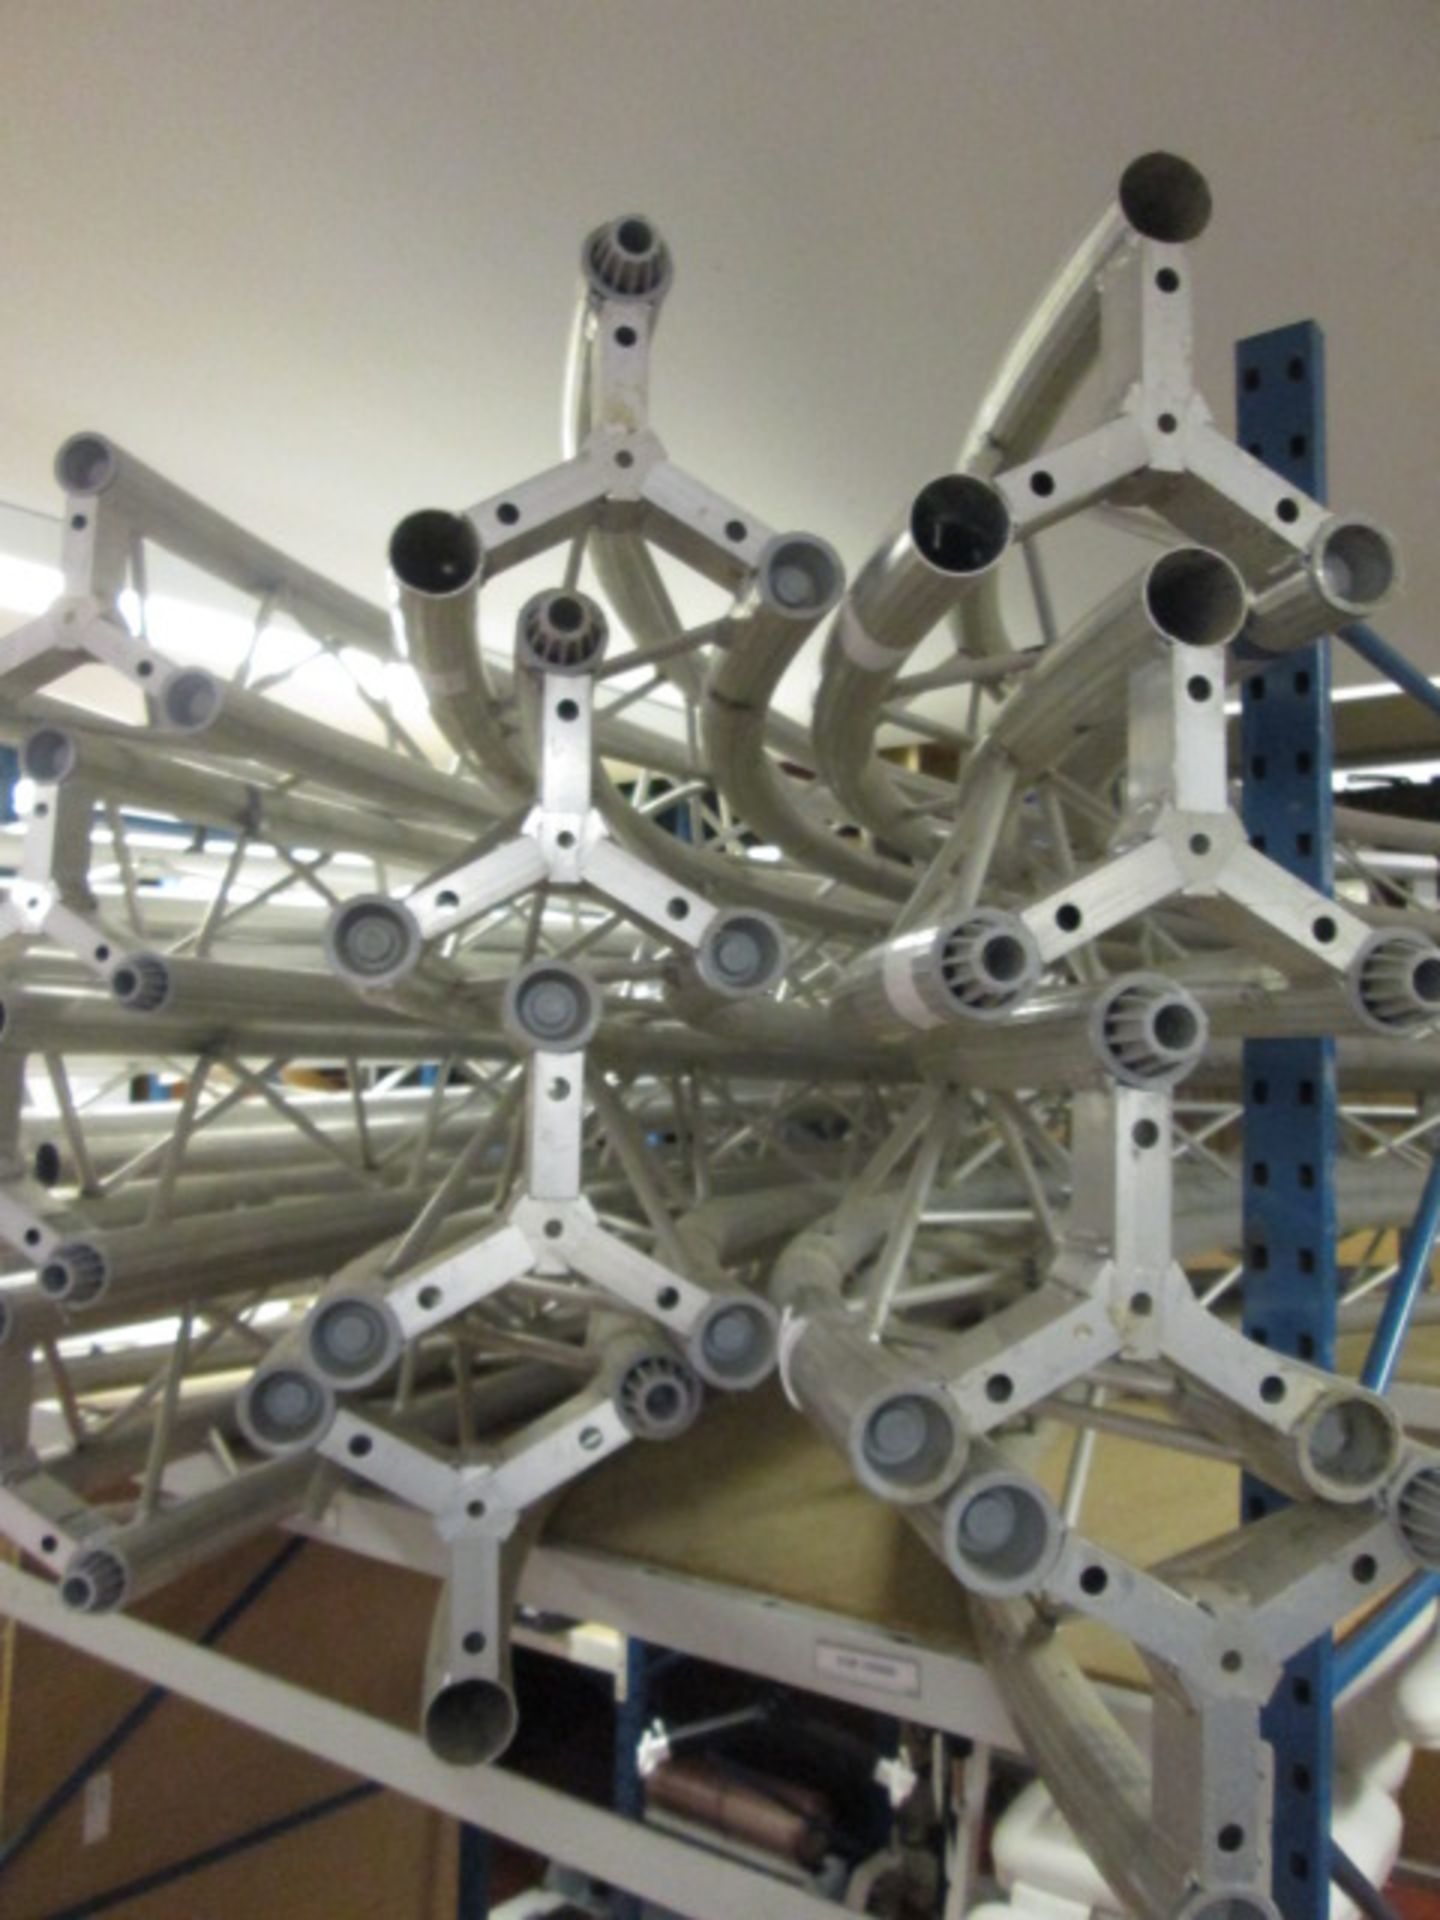 Lot to Include Quantity of Metalworx Aluminium Triangle Truss. Used for Lighting/Staging - Image 7 of 7